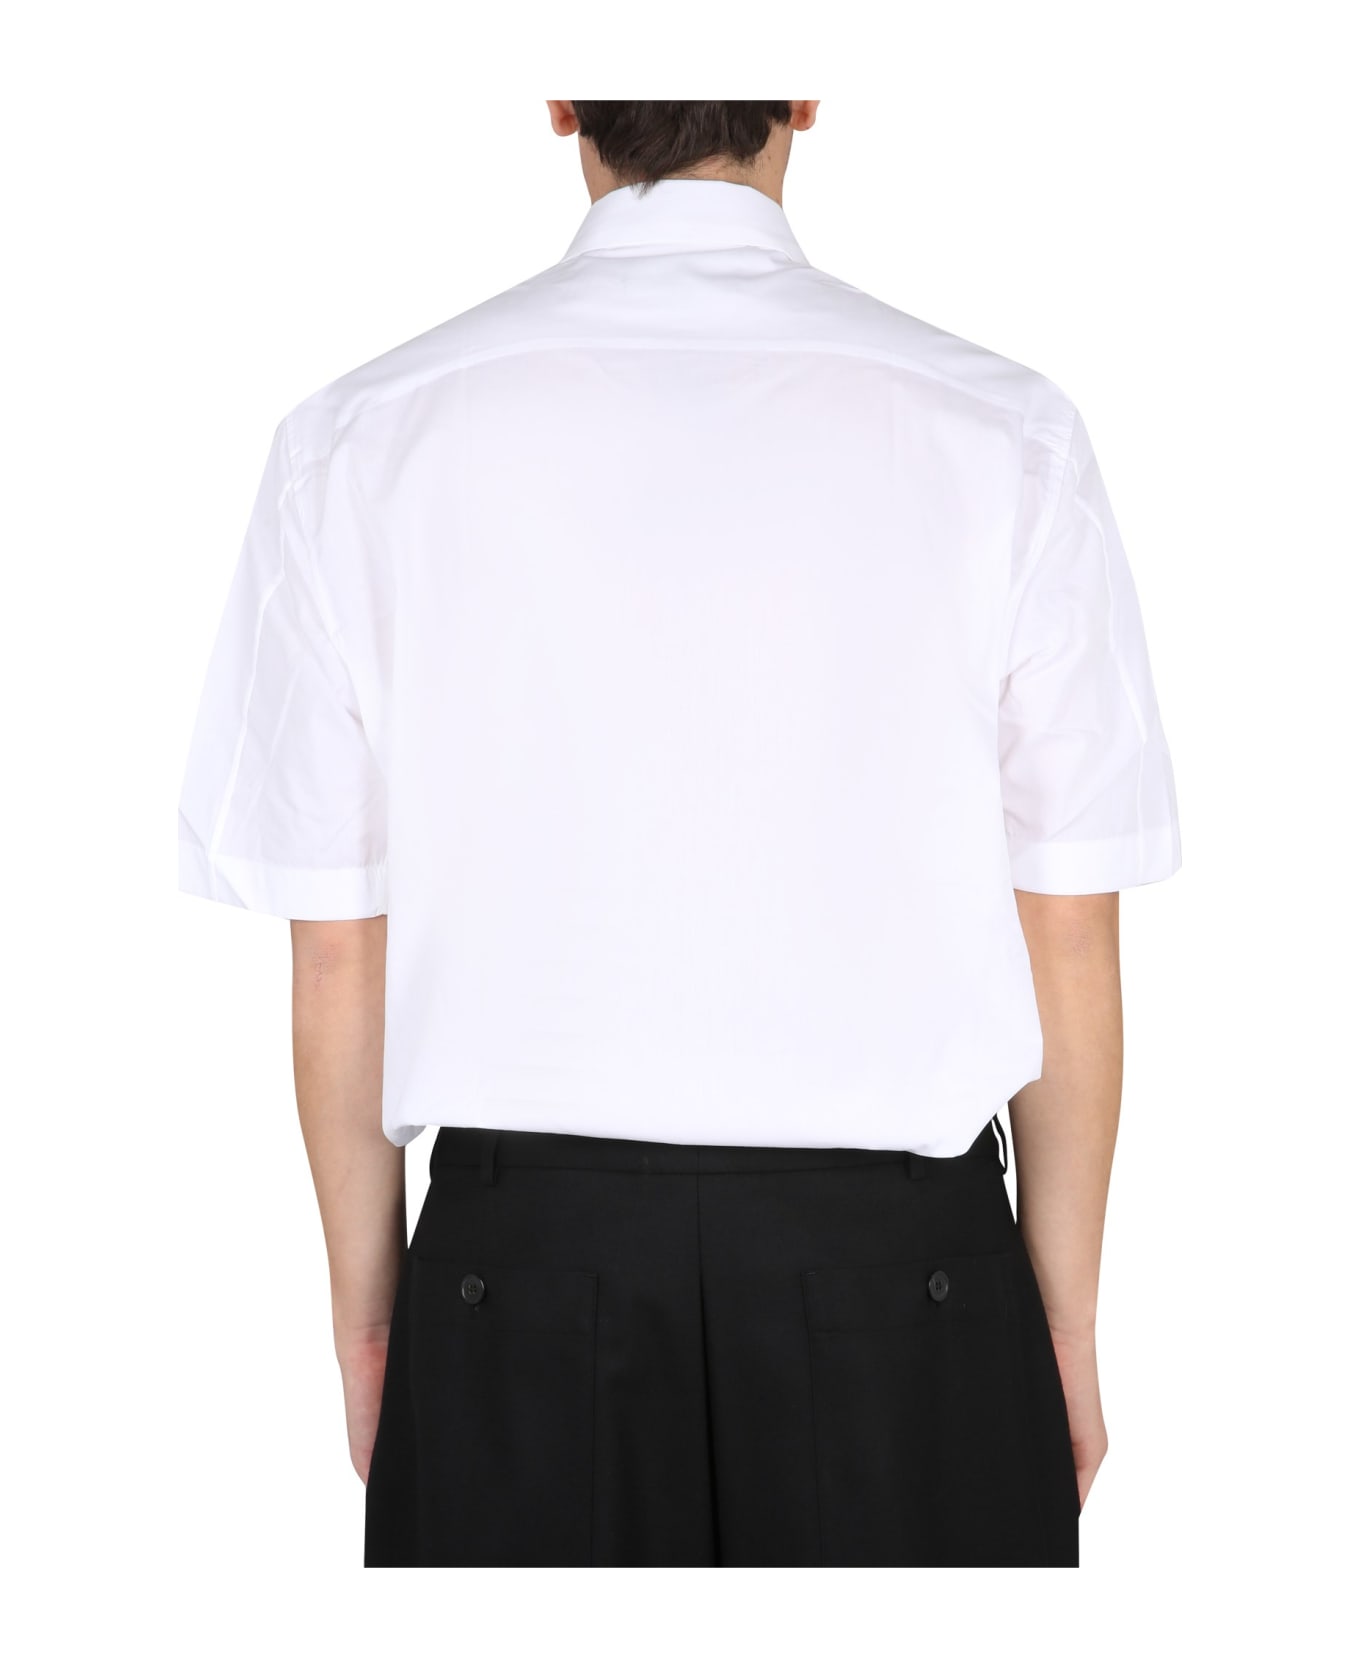 Fred Perry by Raf Simons Shirt With Patch - BIANCO